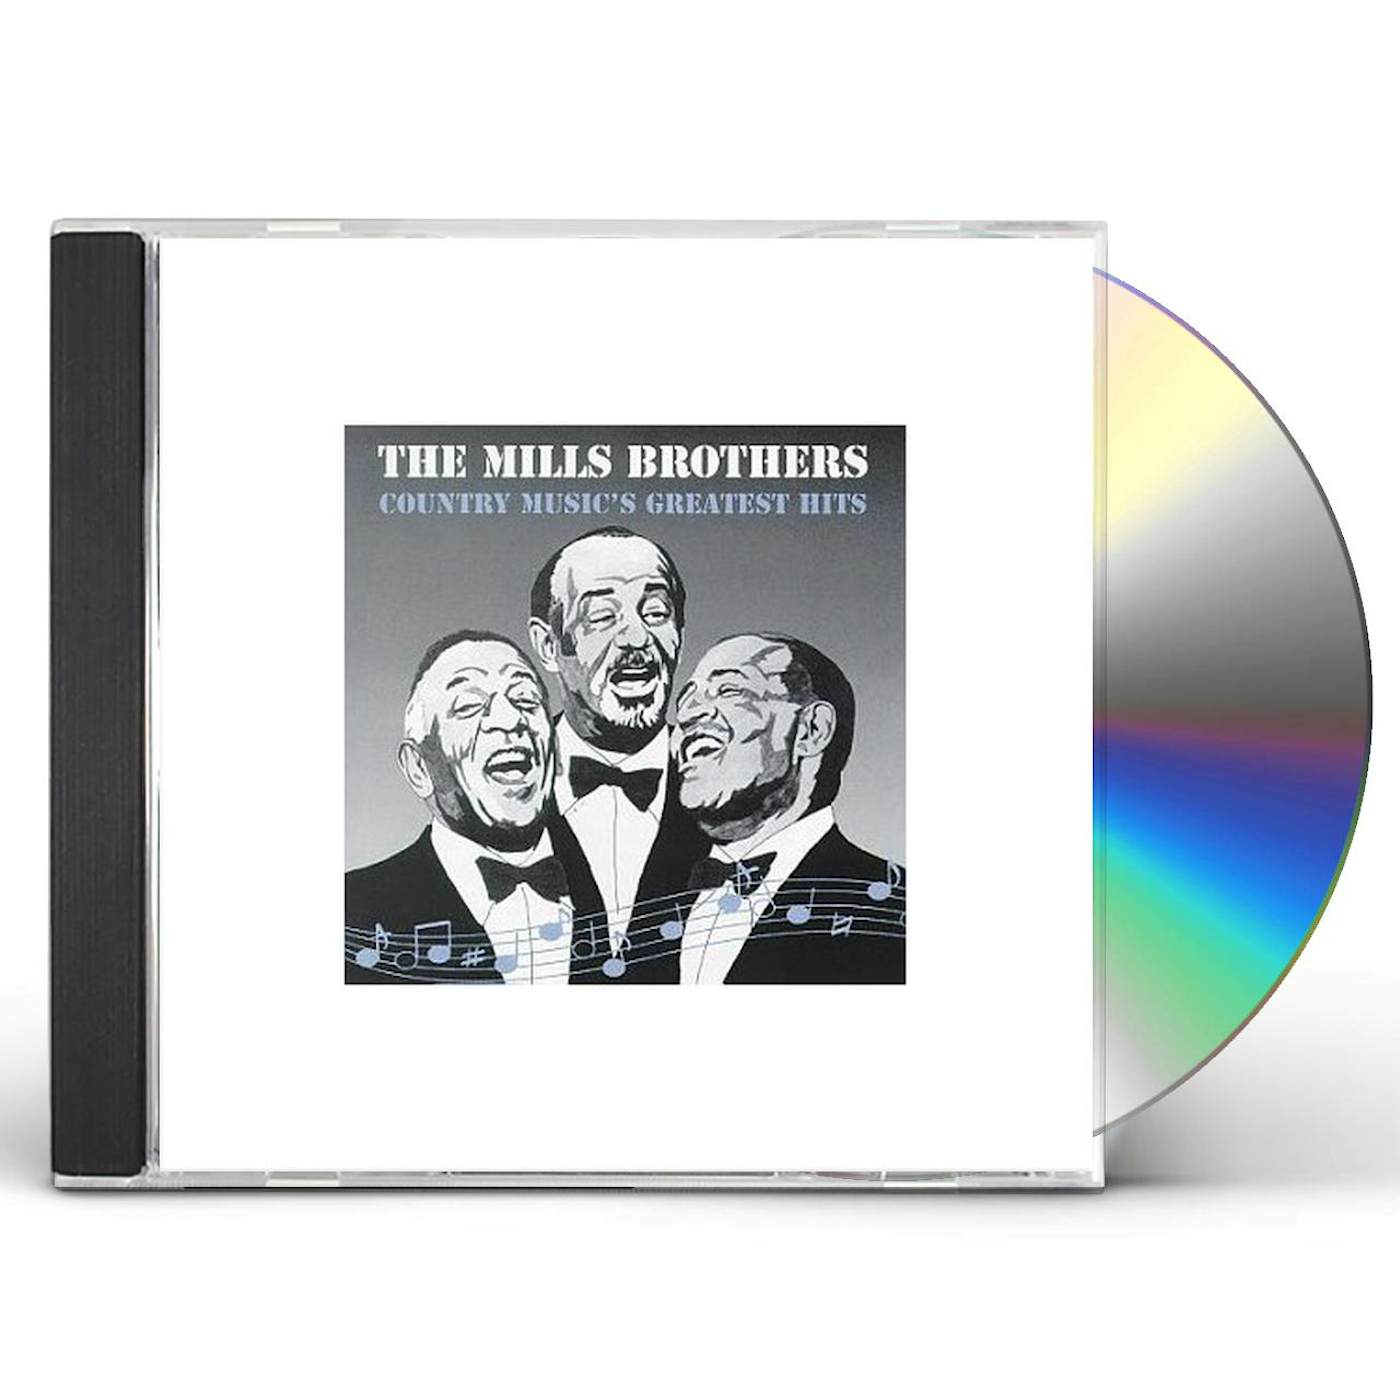 The Mills Brothers COUNTRY MUSIC'S GREATEST HITS CD